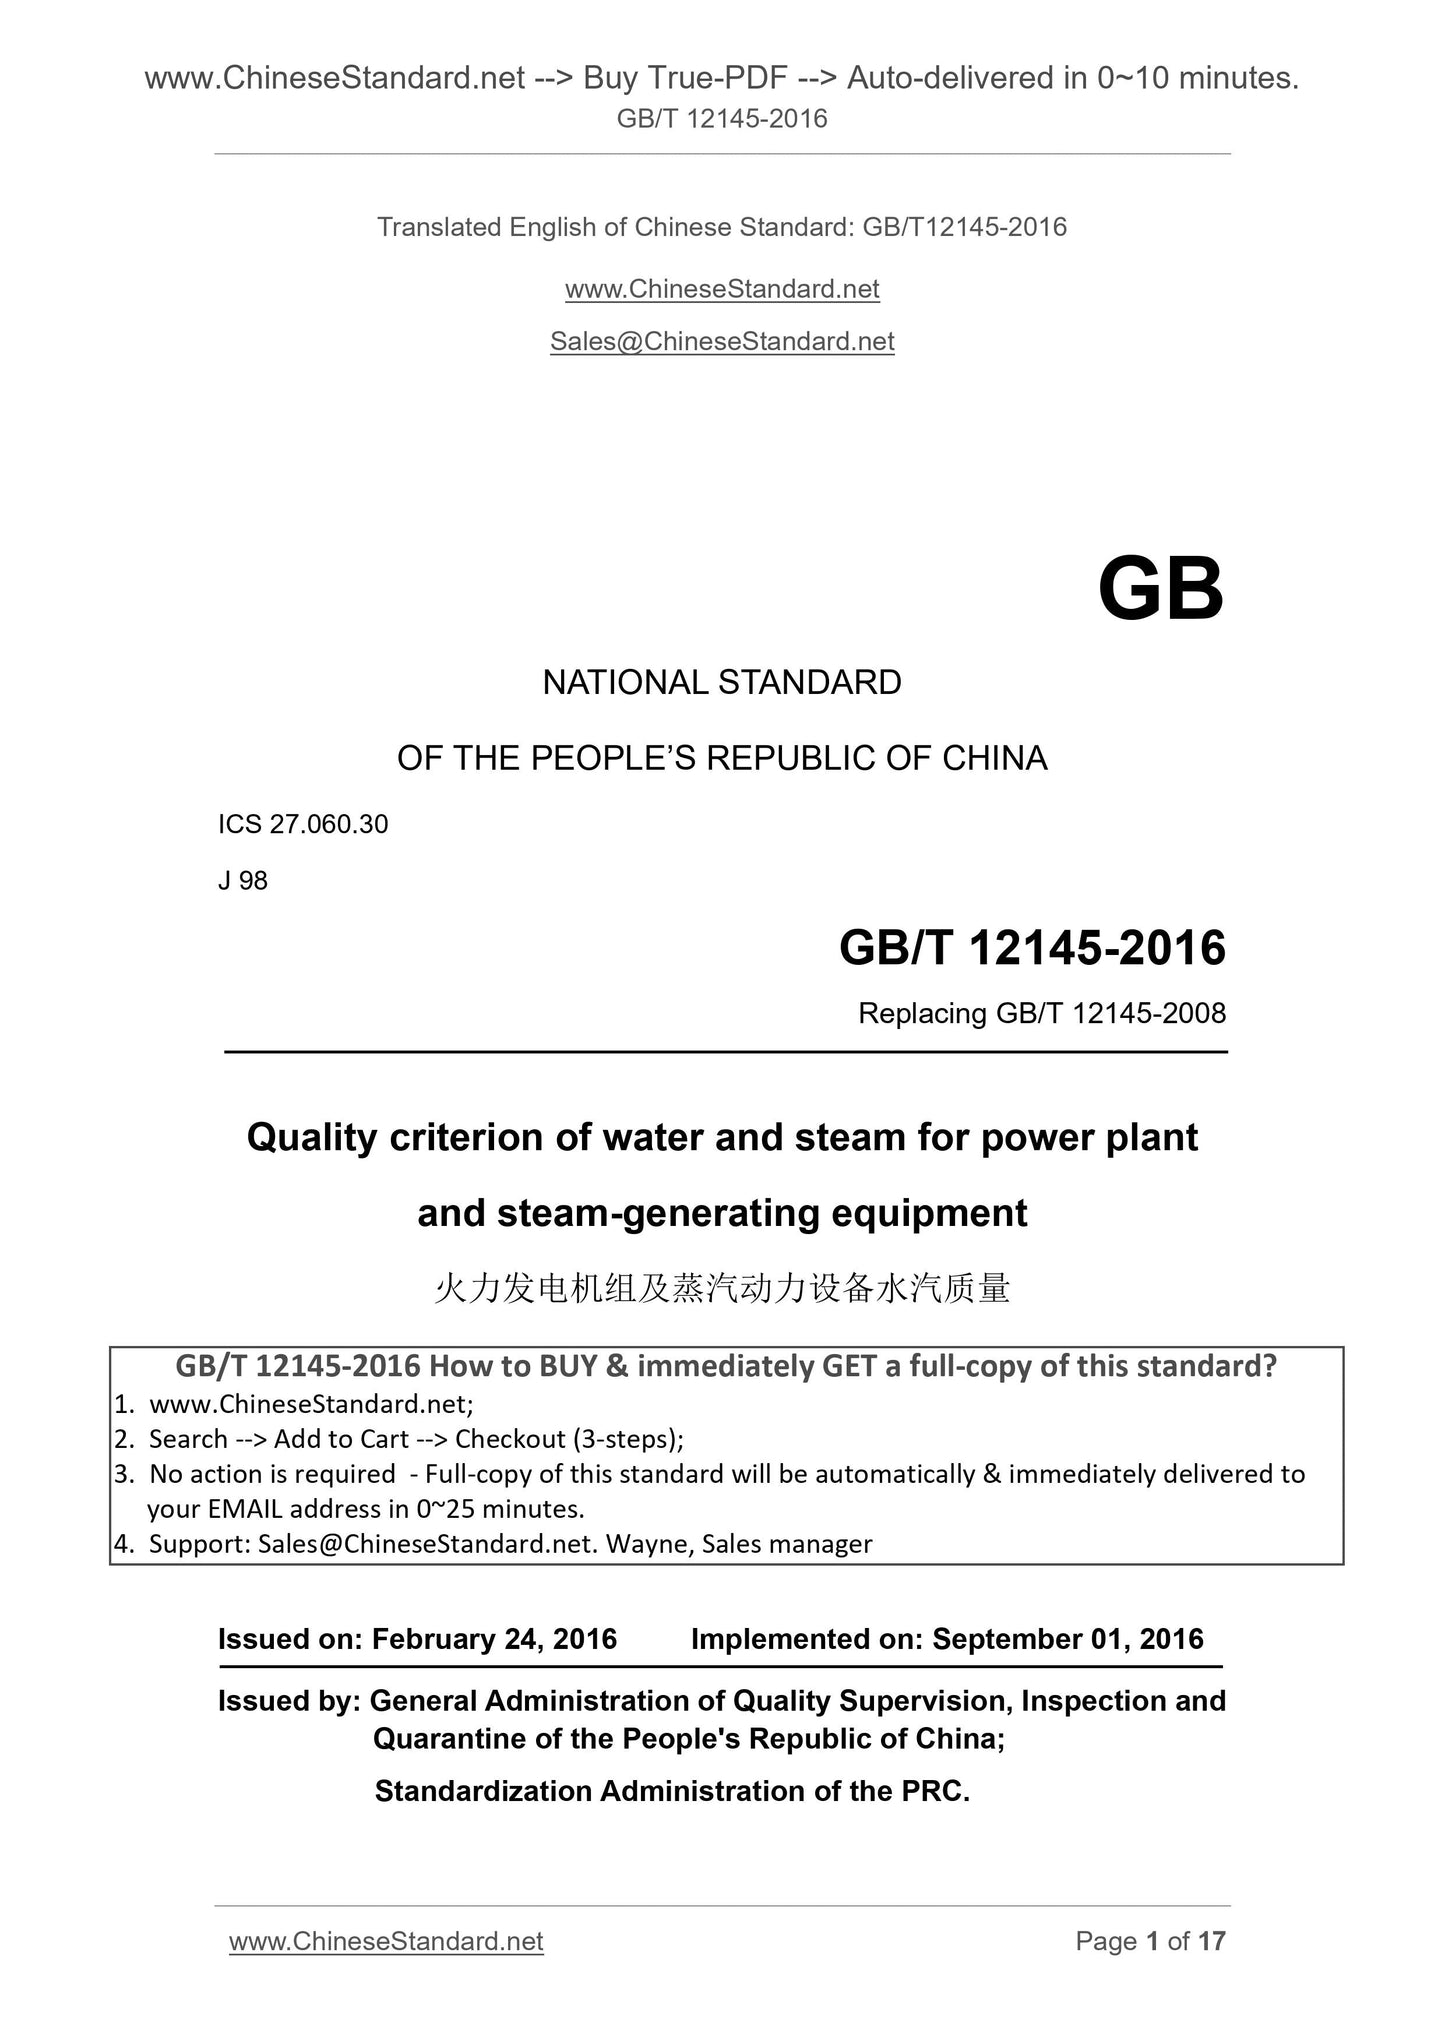 GB/T 12145-2016 Page 1